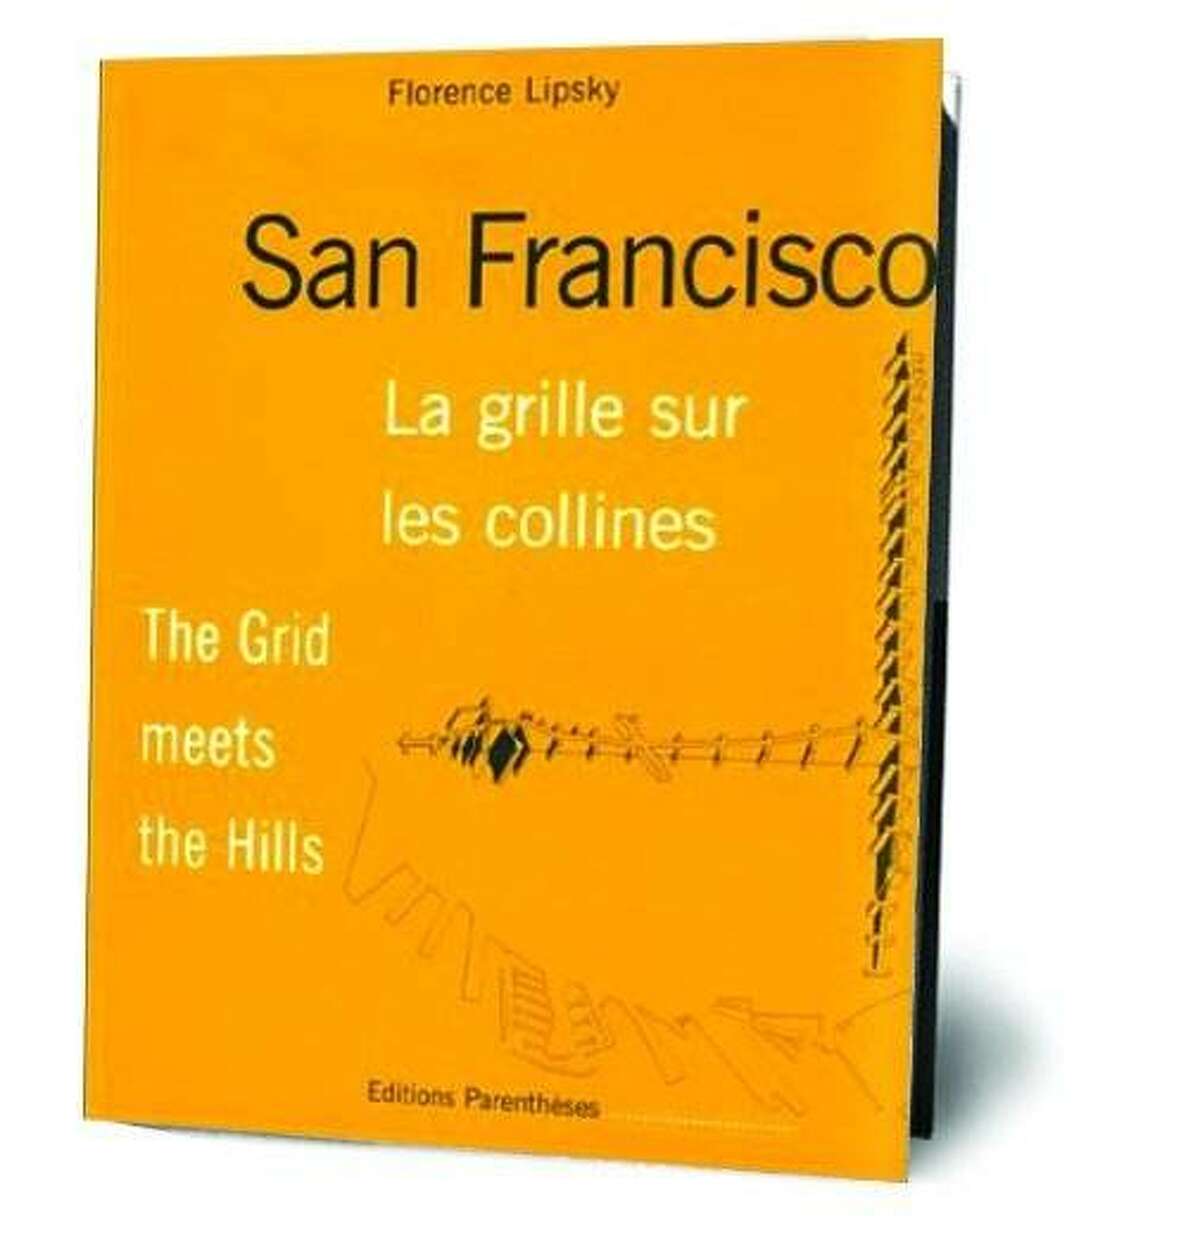 Cover of Florence Lipsky's book "San Francisco: The grid meets the hills."